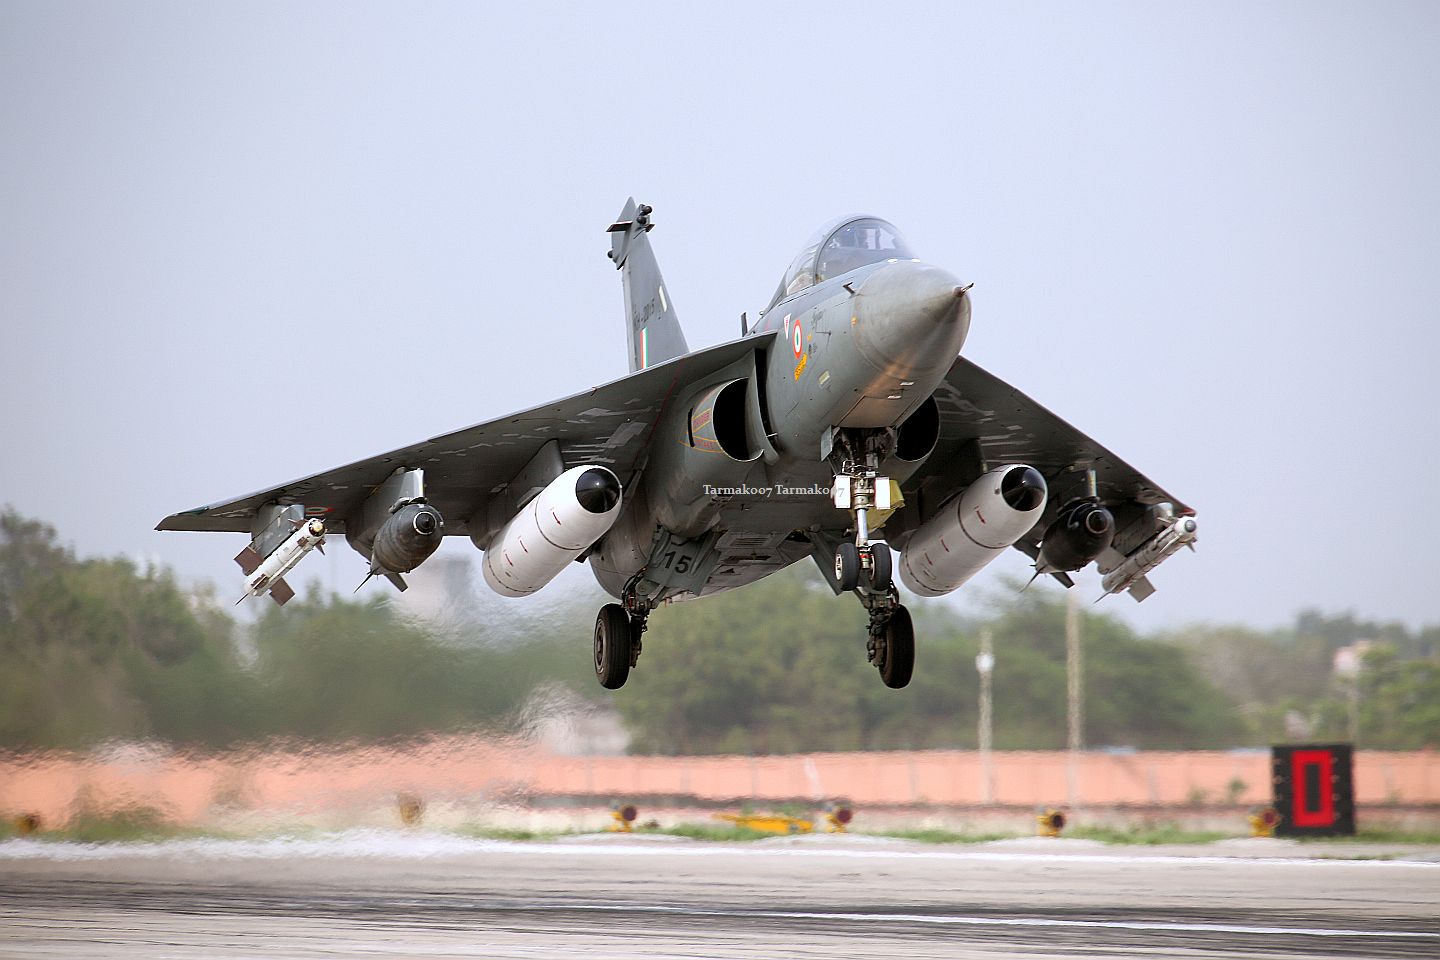 Tejas can fly longer distances i.e. - 2,300 km as compared to the 2,037 km range of JF-17 Thunder. Also, Tejas can carry more fuel, 2,500 kg in contrast to 2,300 kg that JF-17 Thunder carries. Moreover, its biggest advantage is that it can be refueled mid-air, whereas the JF-17 cannot be refueled while airborne.